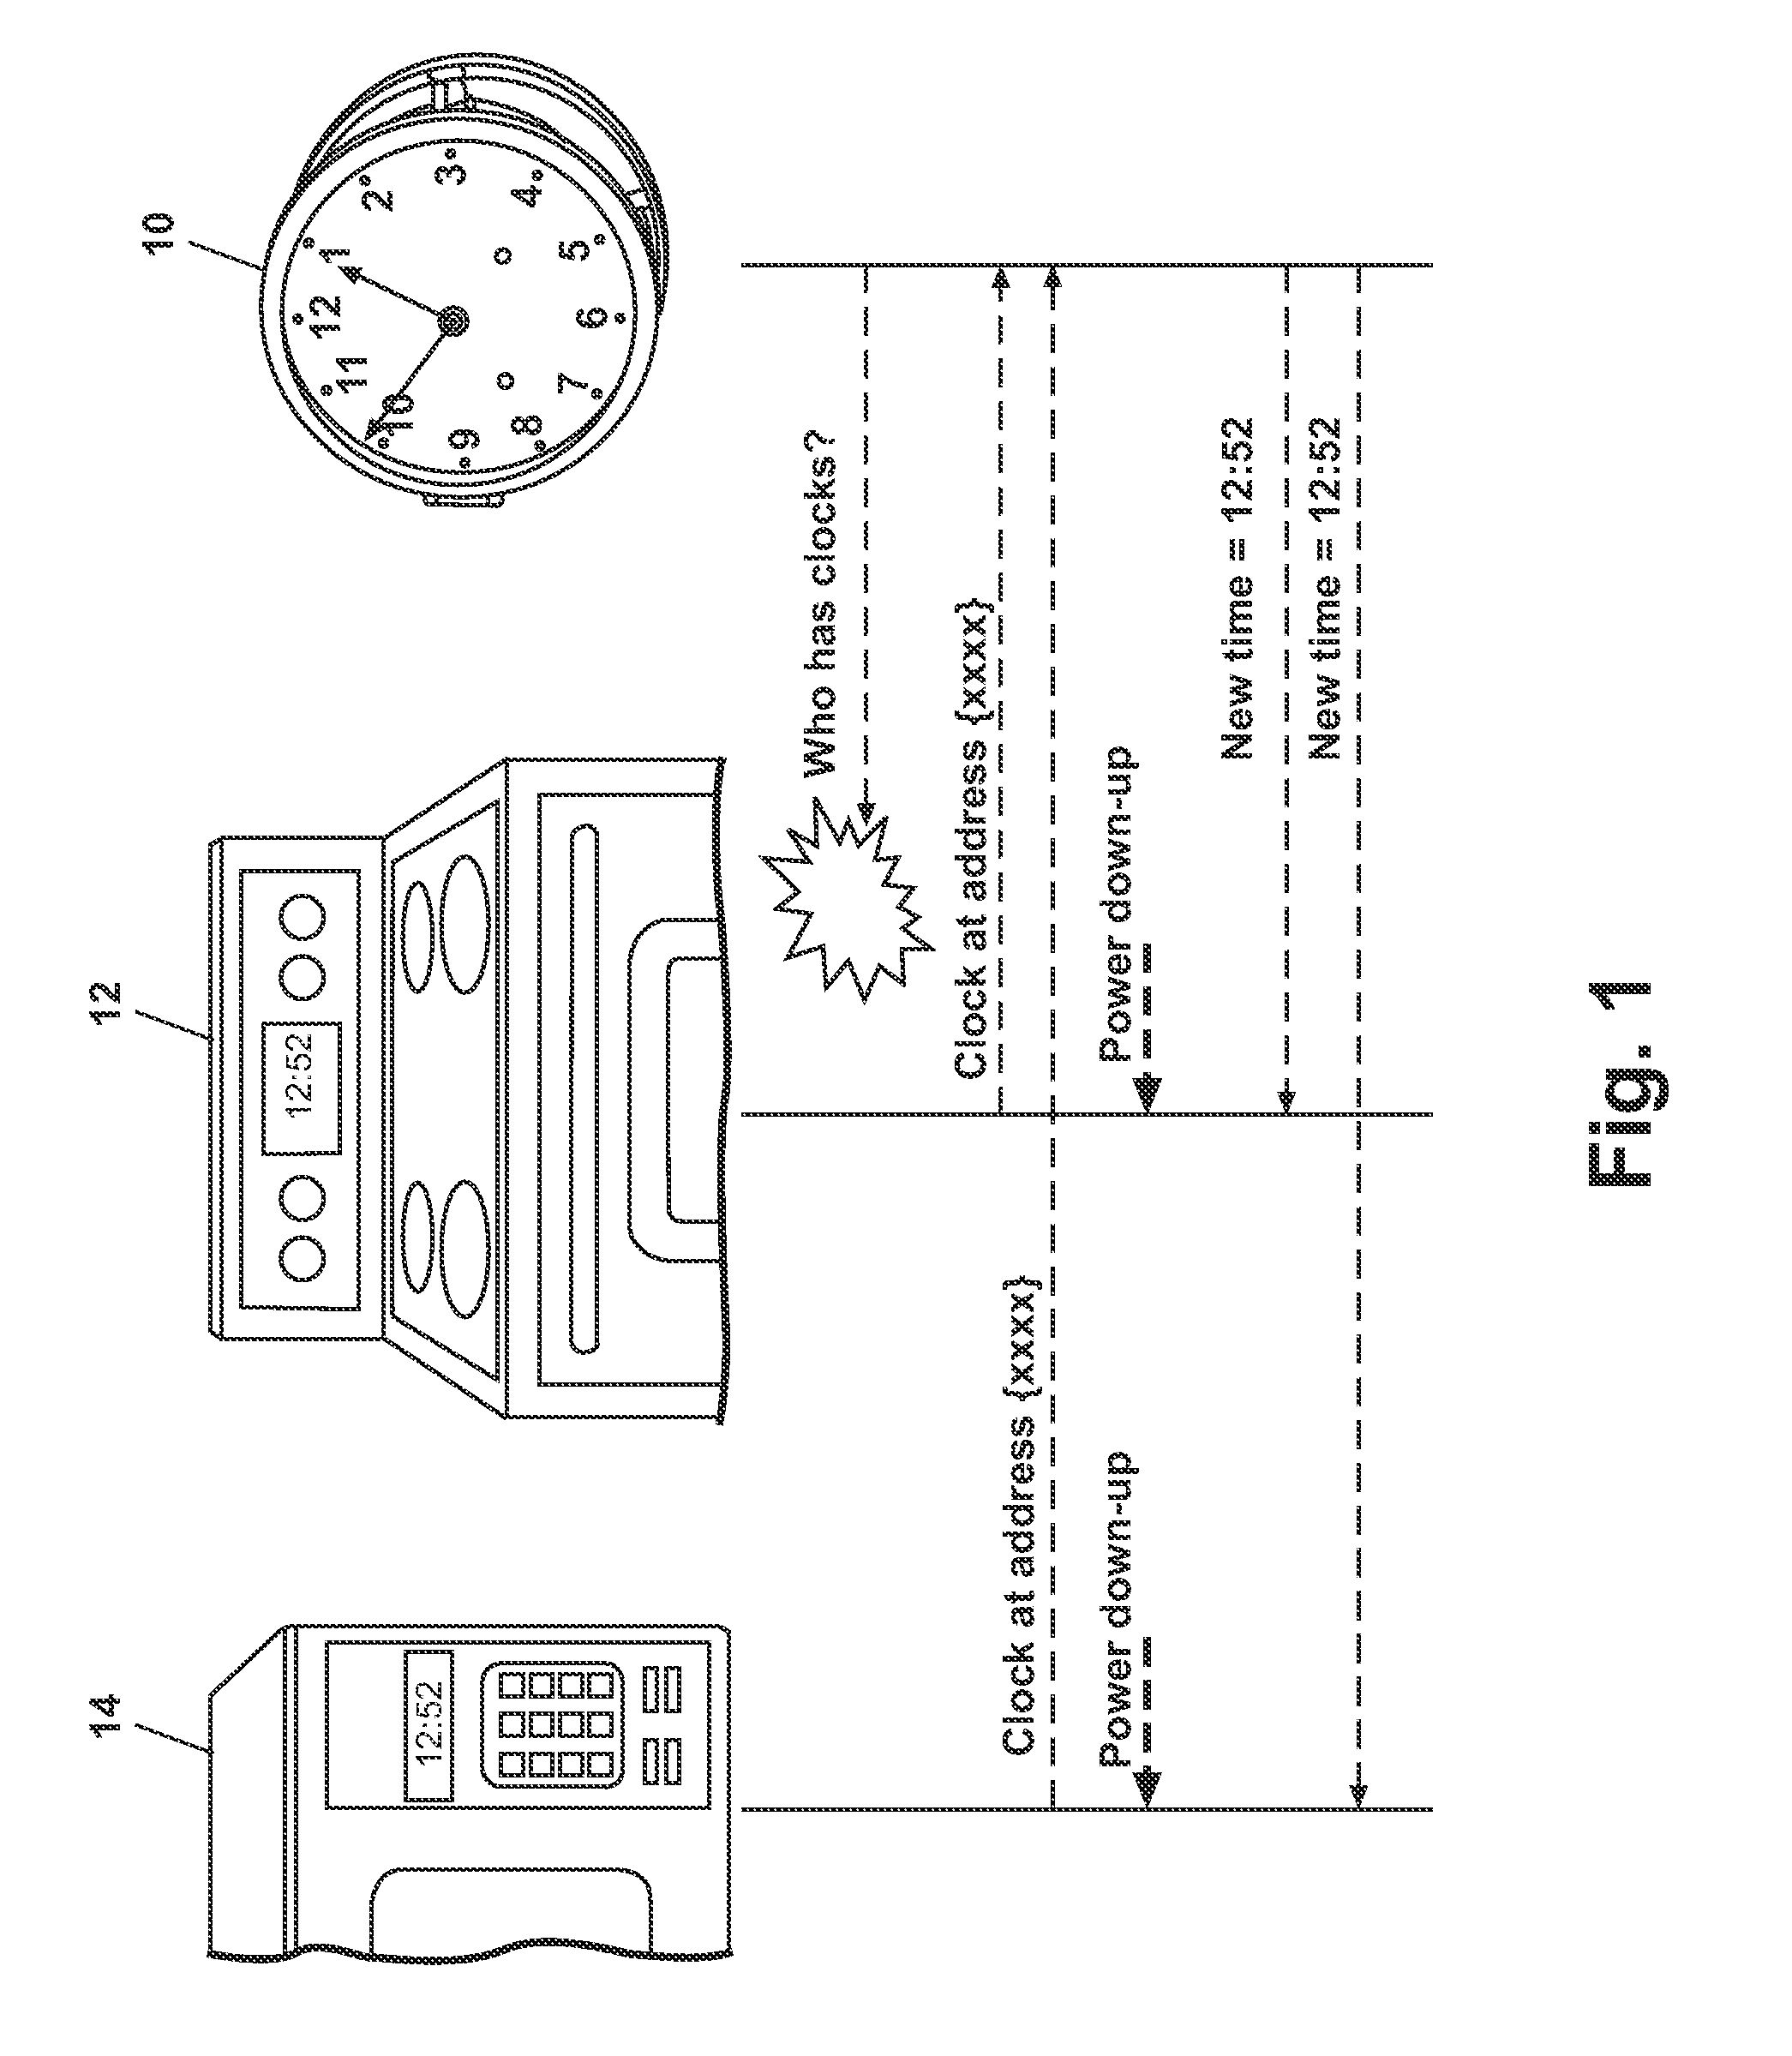 Appliance network for a networked appliance and a cellular phone